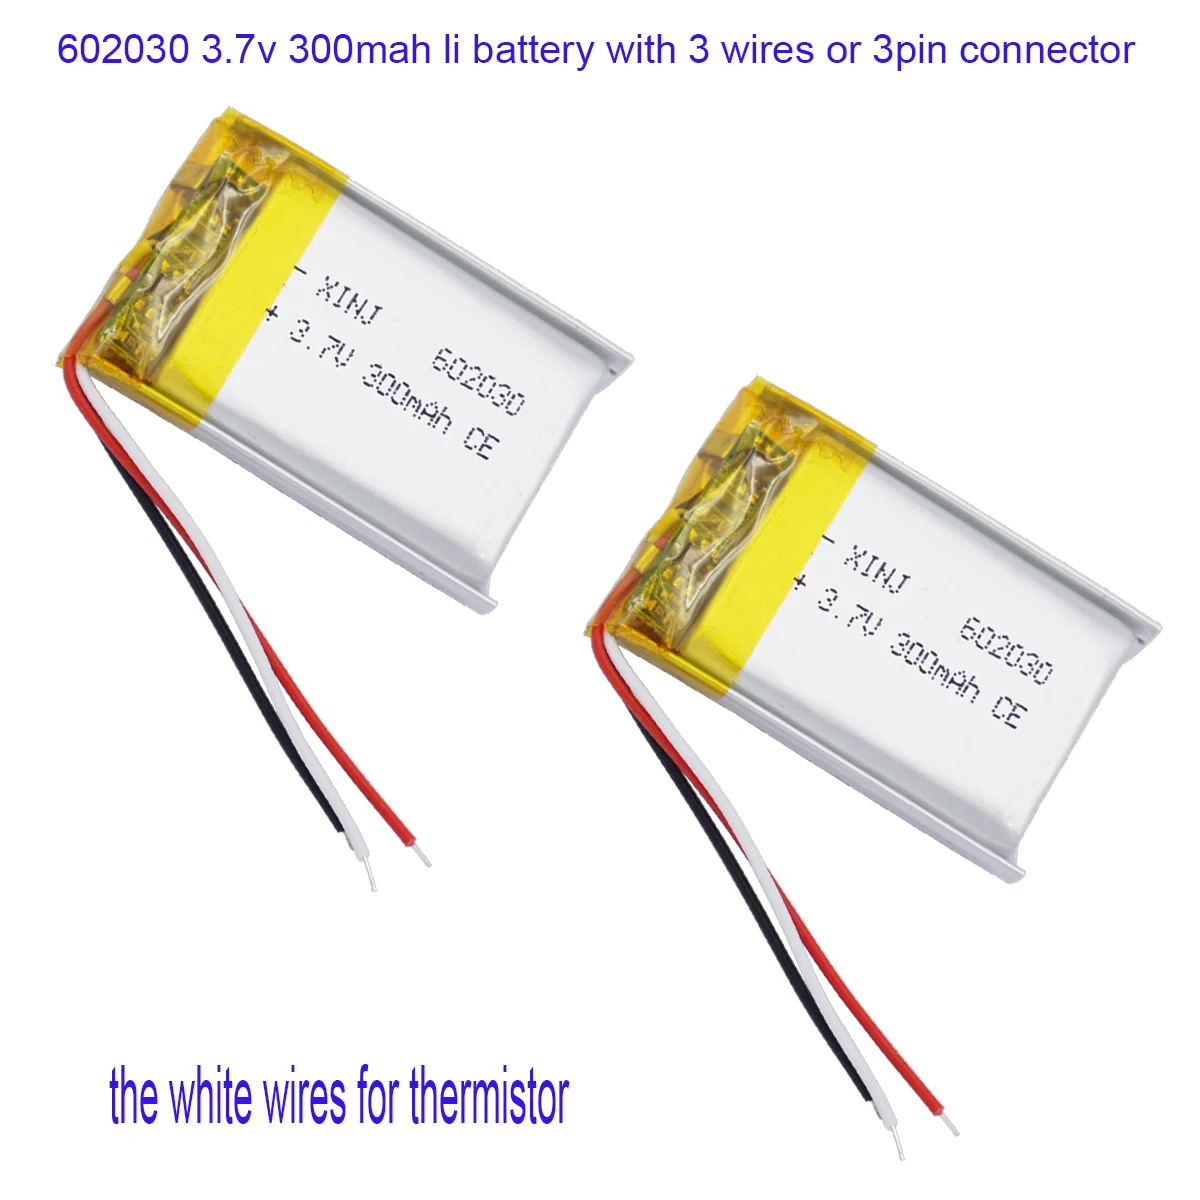 

3.7V 300mAh 1.11Wh Li-Polymer Replacement Lipo Rechargeable Battery JST 3Pin NTC Thermistor 3 Wires 602030 For GPS Camera LED